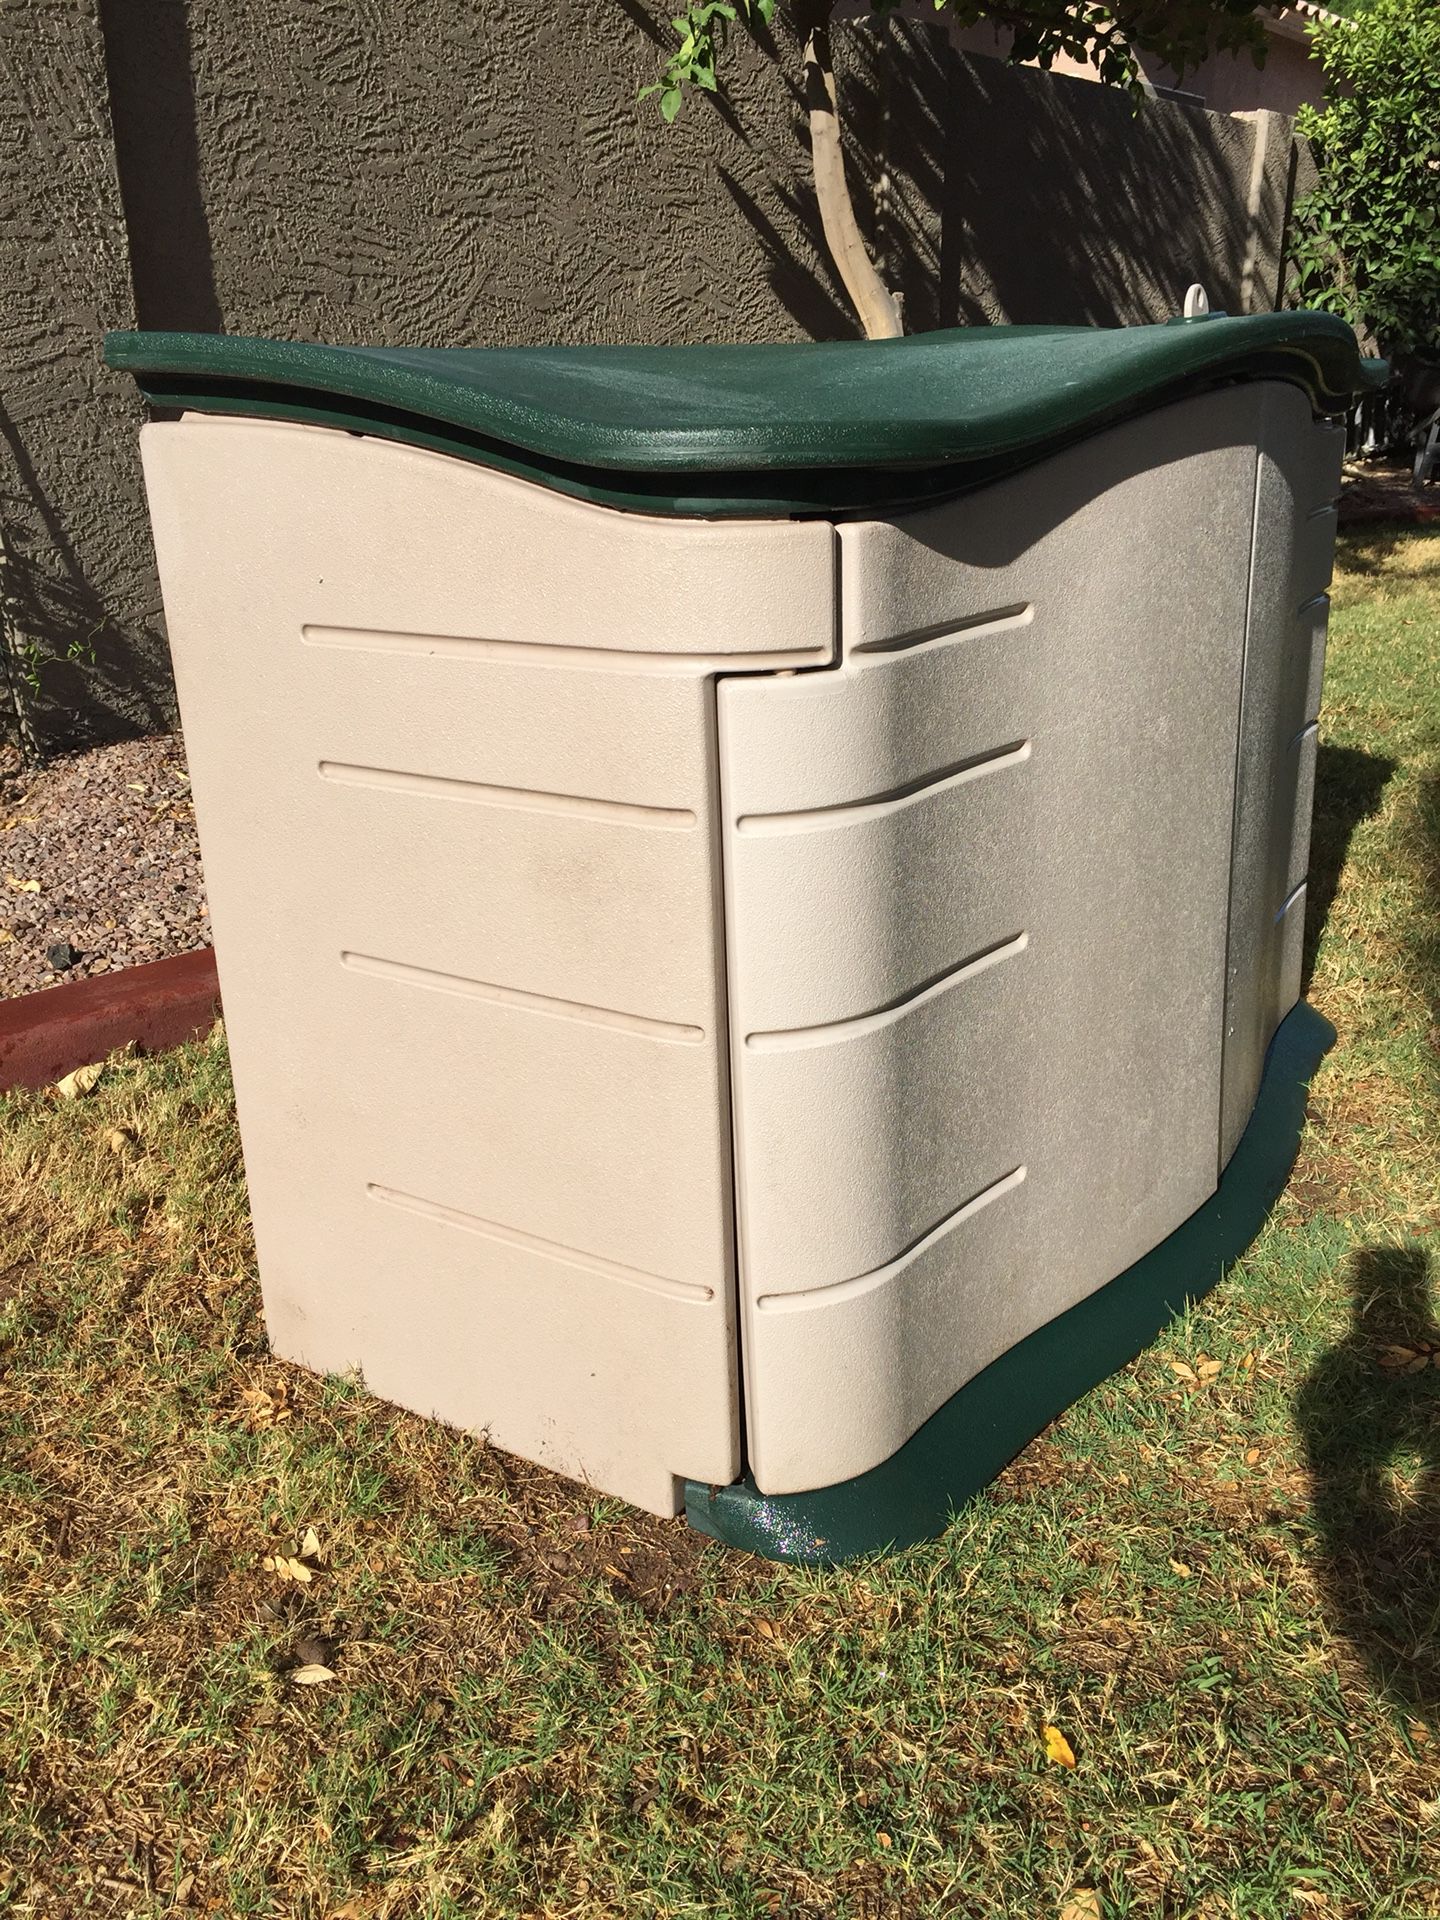 Rubbermaid Vertical Plastic Weather Resistant Outdoor Storage Shed, 2x2.5  ft., Olive and Sandstone for Sale in Kearny, NJ - OfferUp